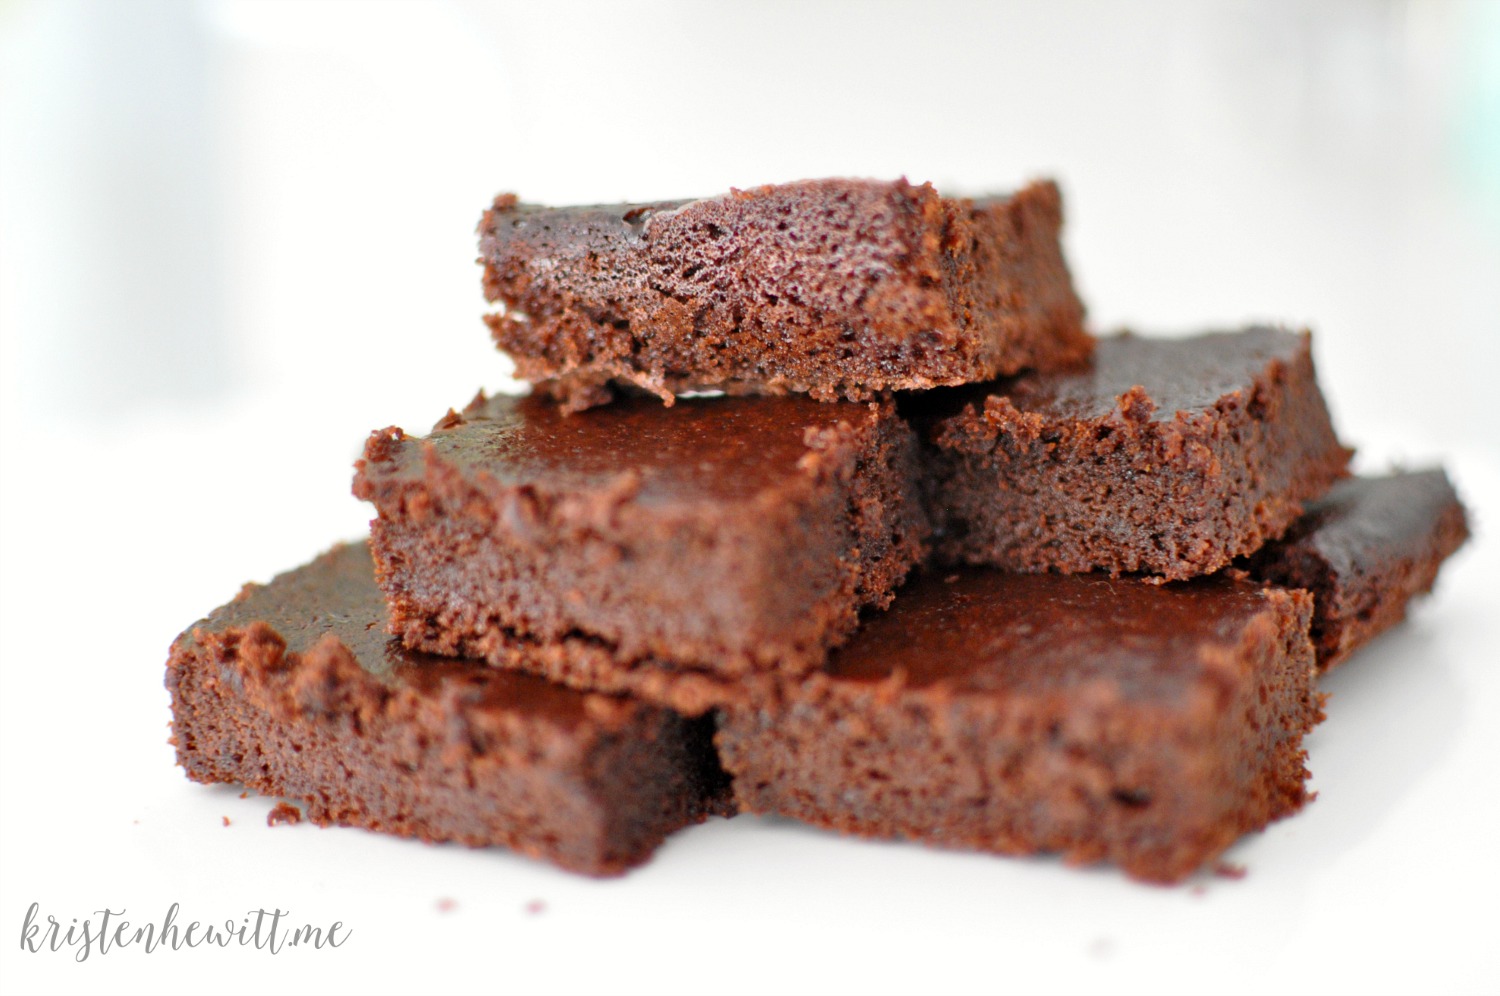 Finding sweet treats is hard when you're on the paleo diet. But don't despair, these easy paleo fudge brownies are easy, satisfying, and delicious!